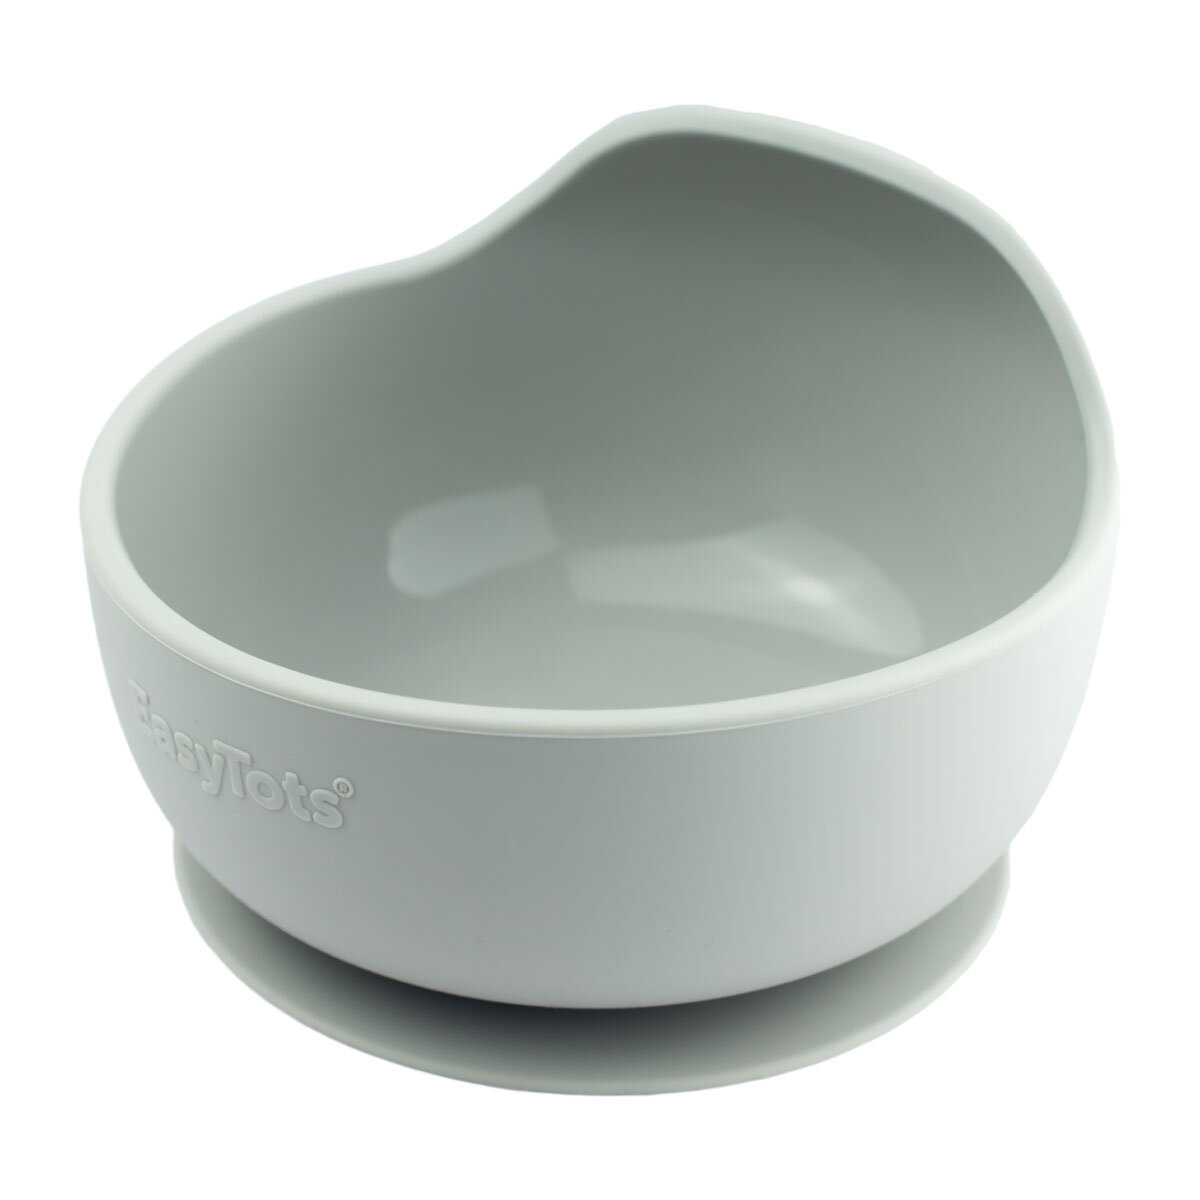 EasyTots Suction Bowl with Bamboo Spoons - Grey